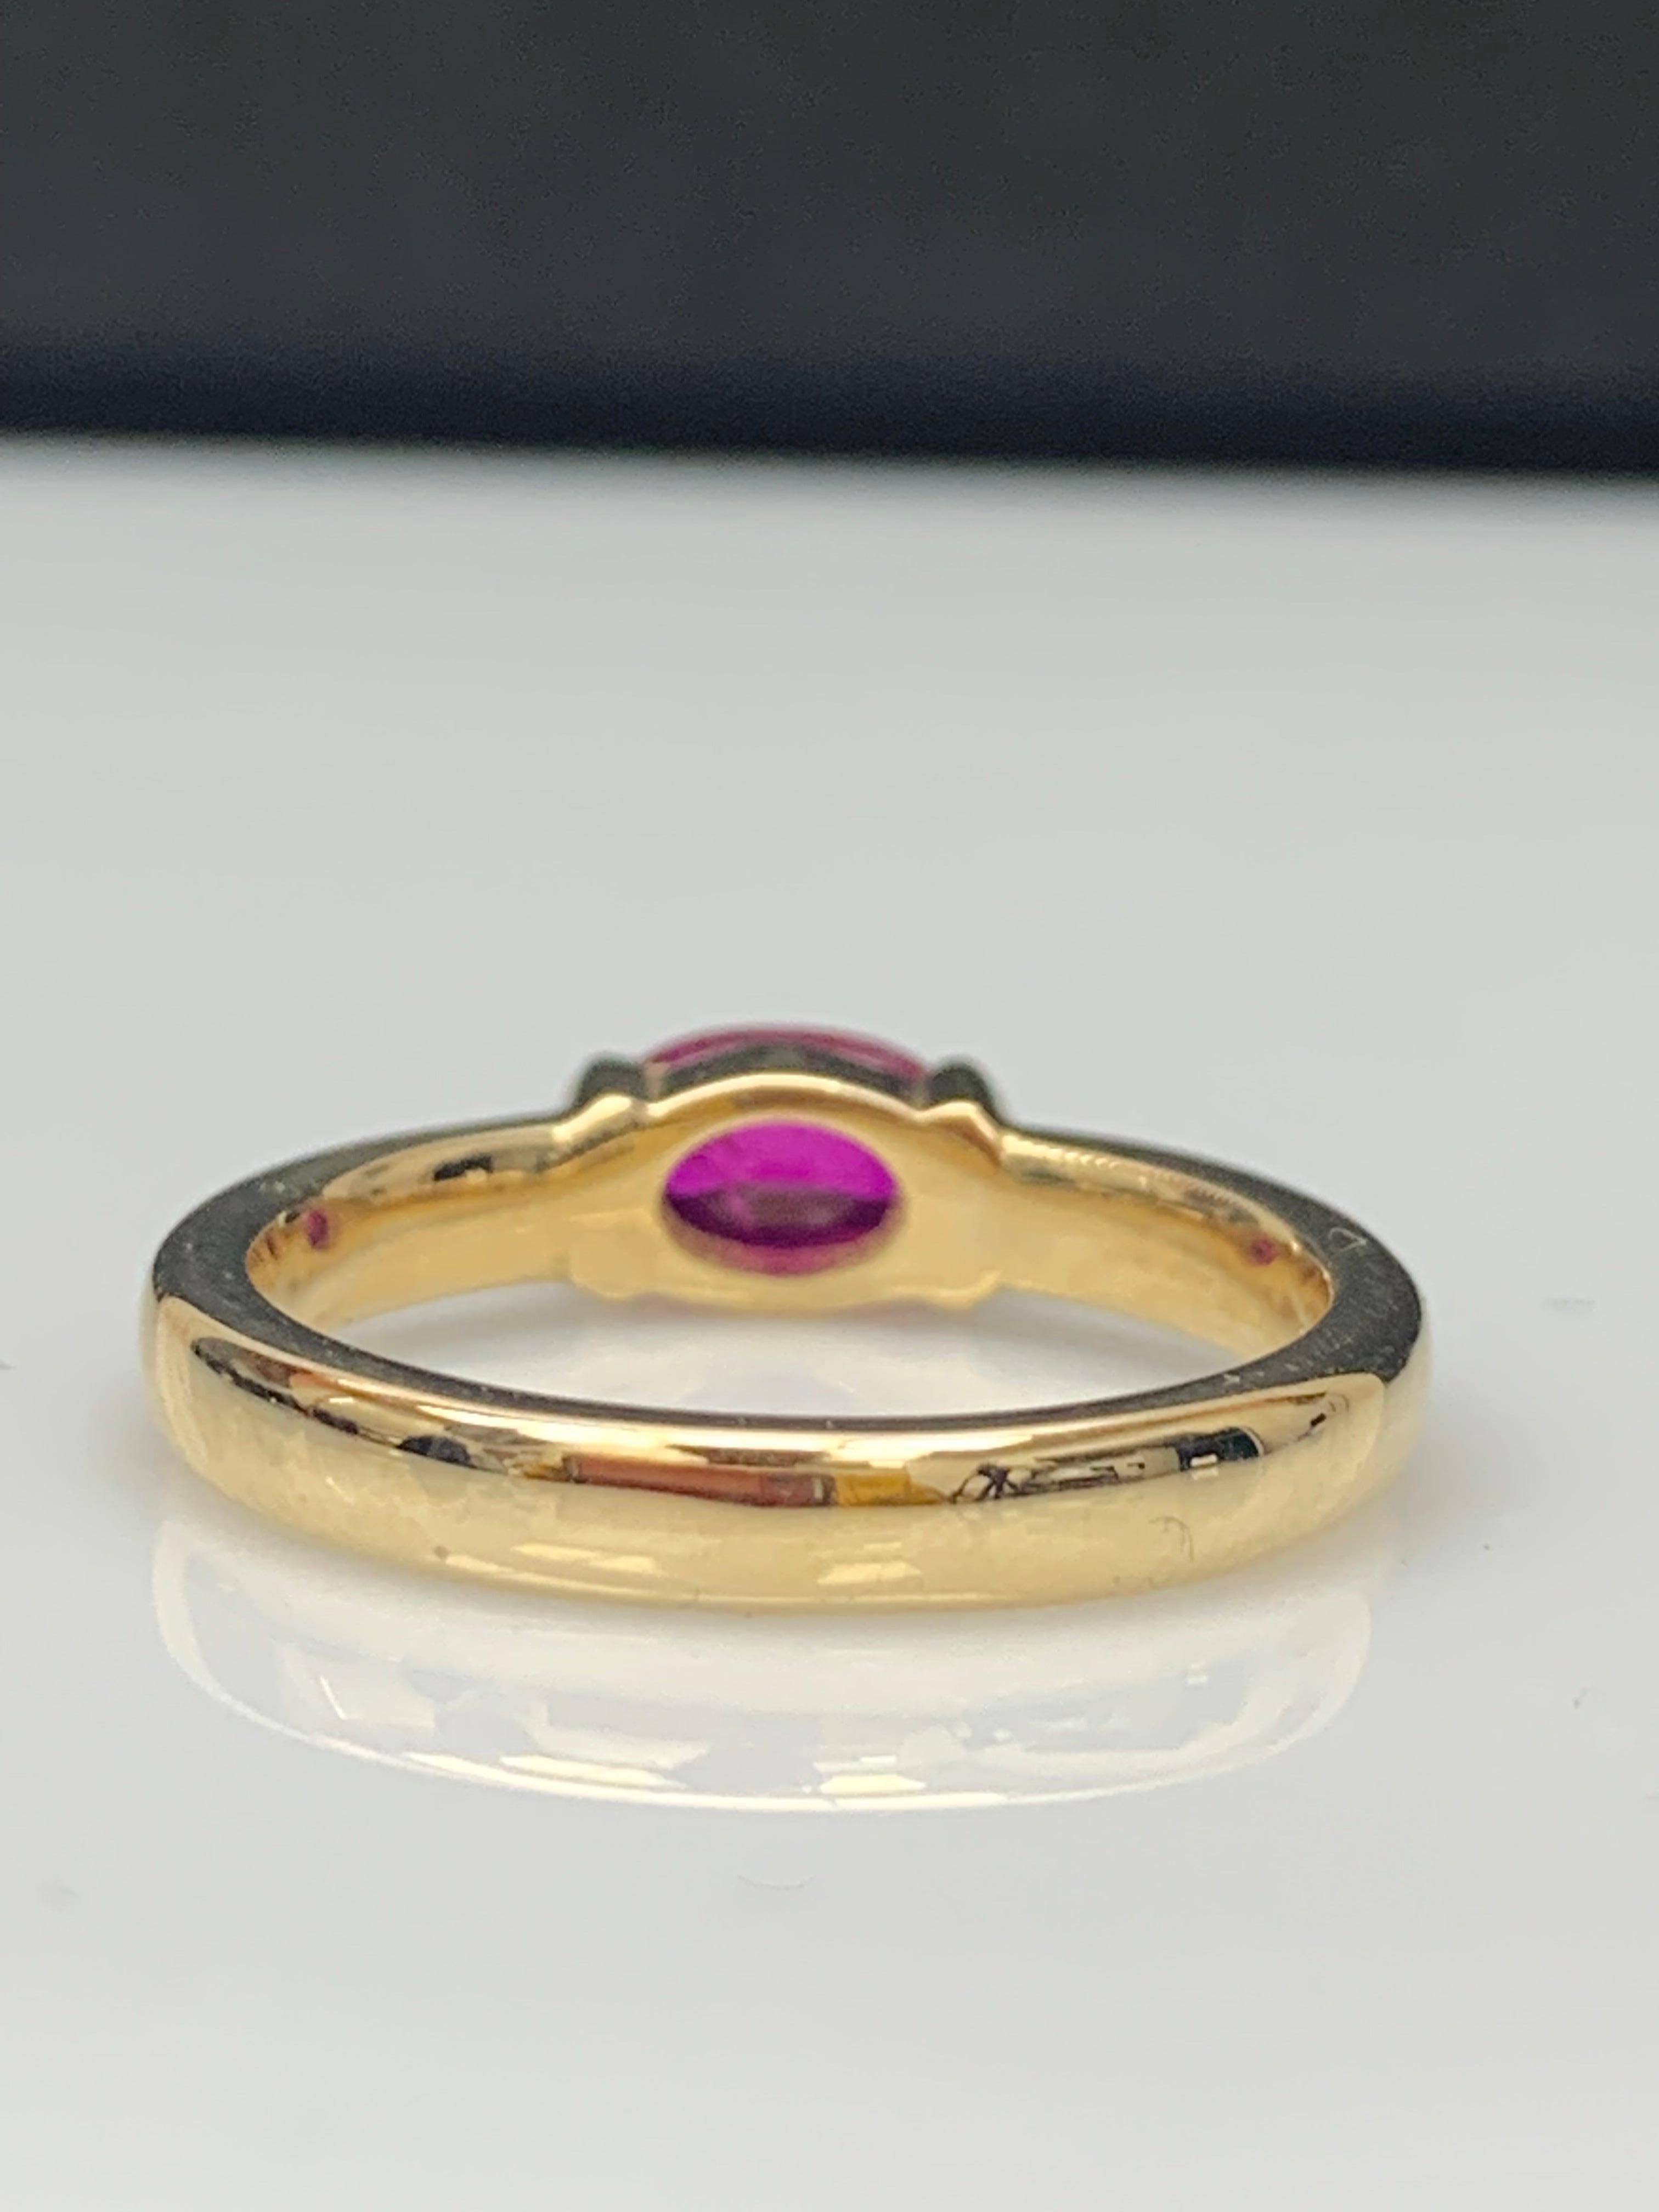 0.78 Carat Oval Cut Ruby Band Ring in 14K Yellow Gold For Sale 7